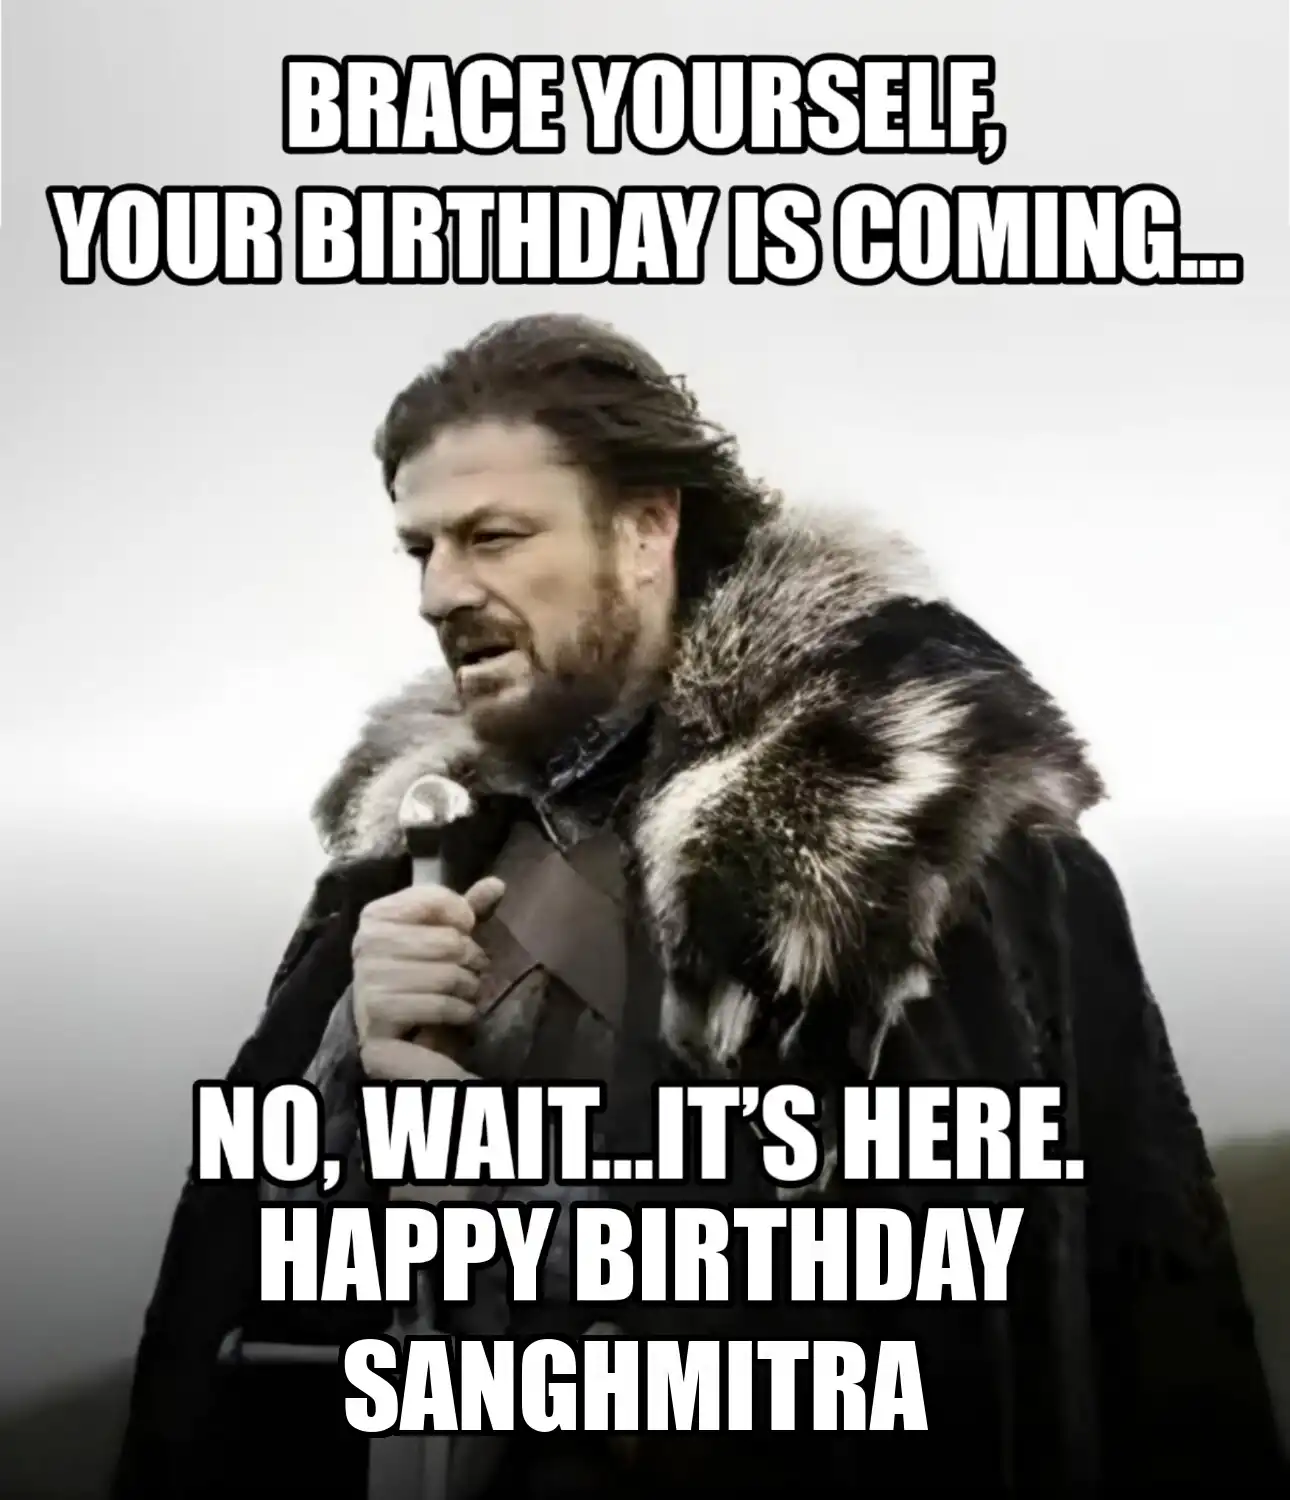 Happy Birthday Sanghmitra Brace Yourself Your Birthday Is Coming Meme